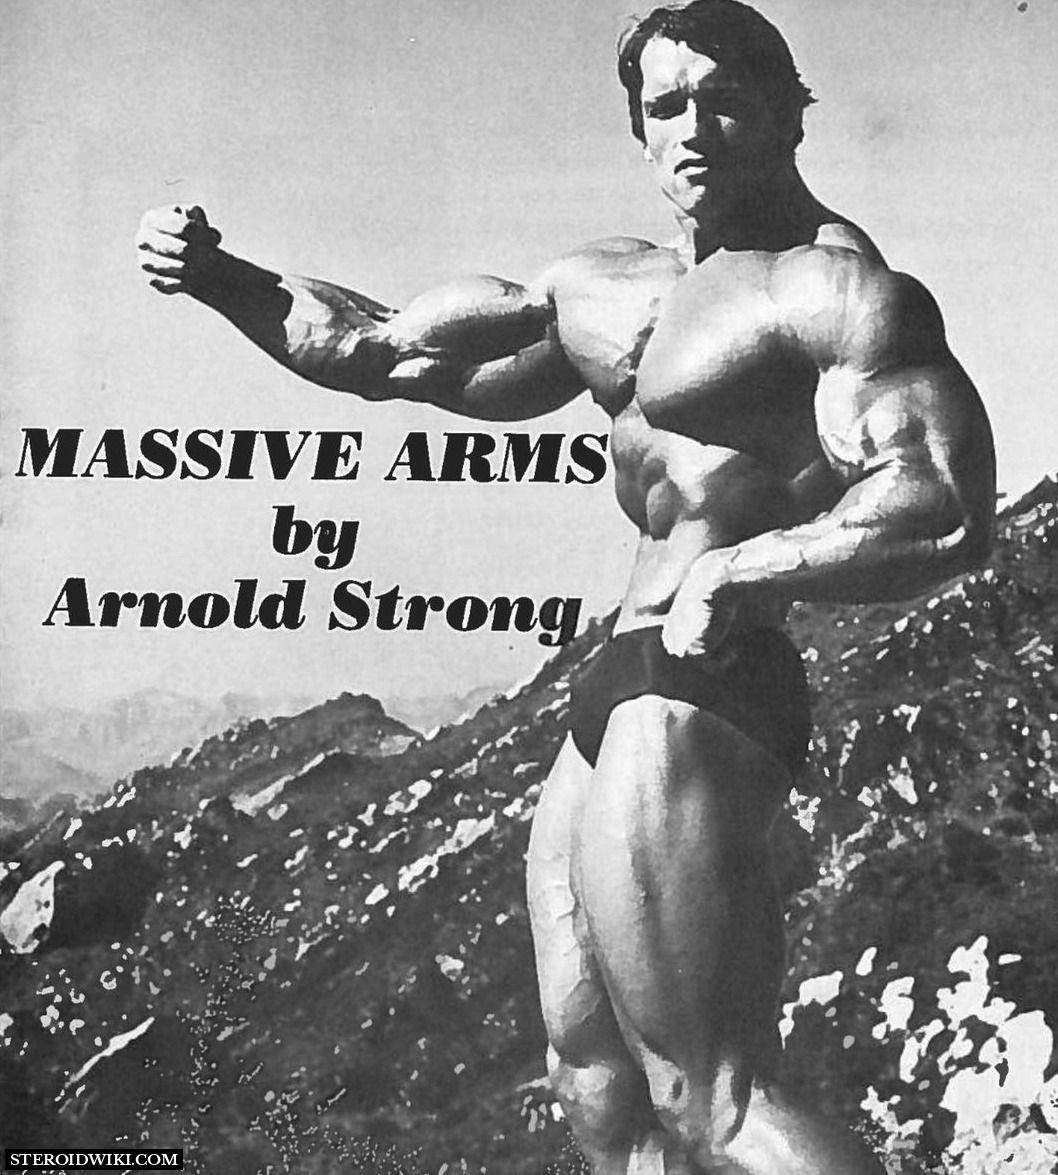 Massive arms by Arnold